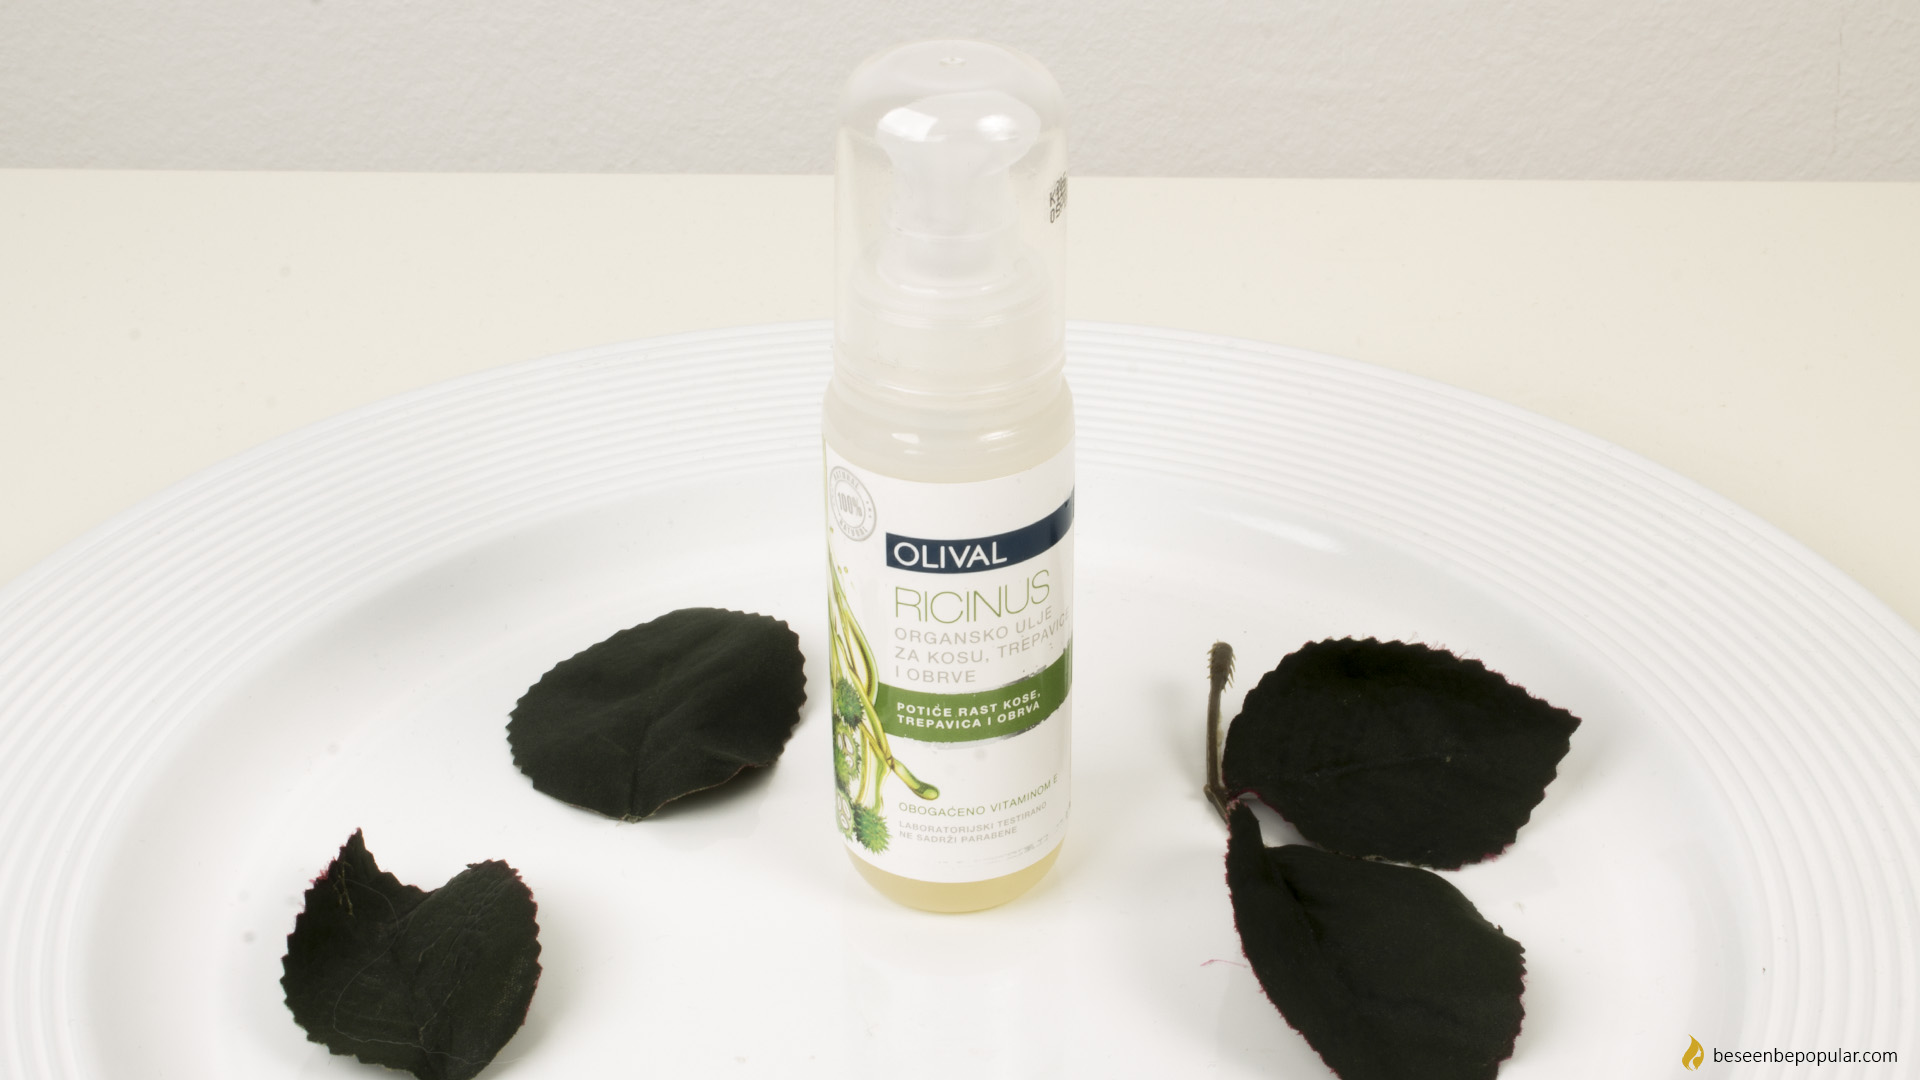 The benefits of ricinus oil